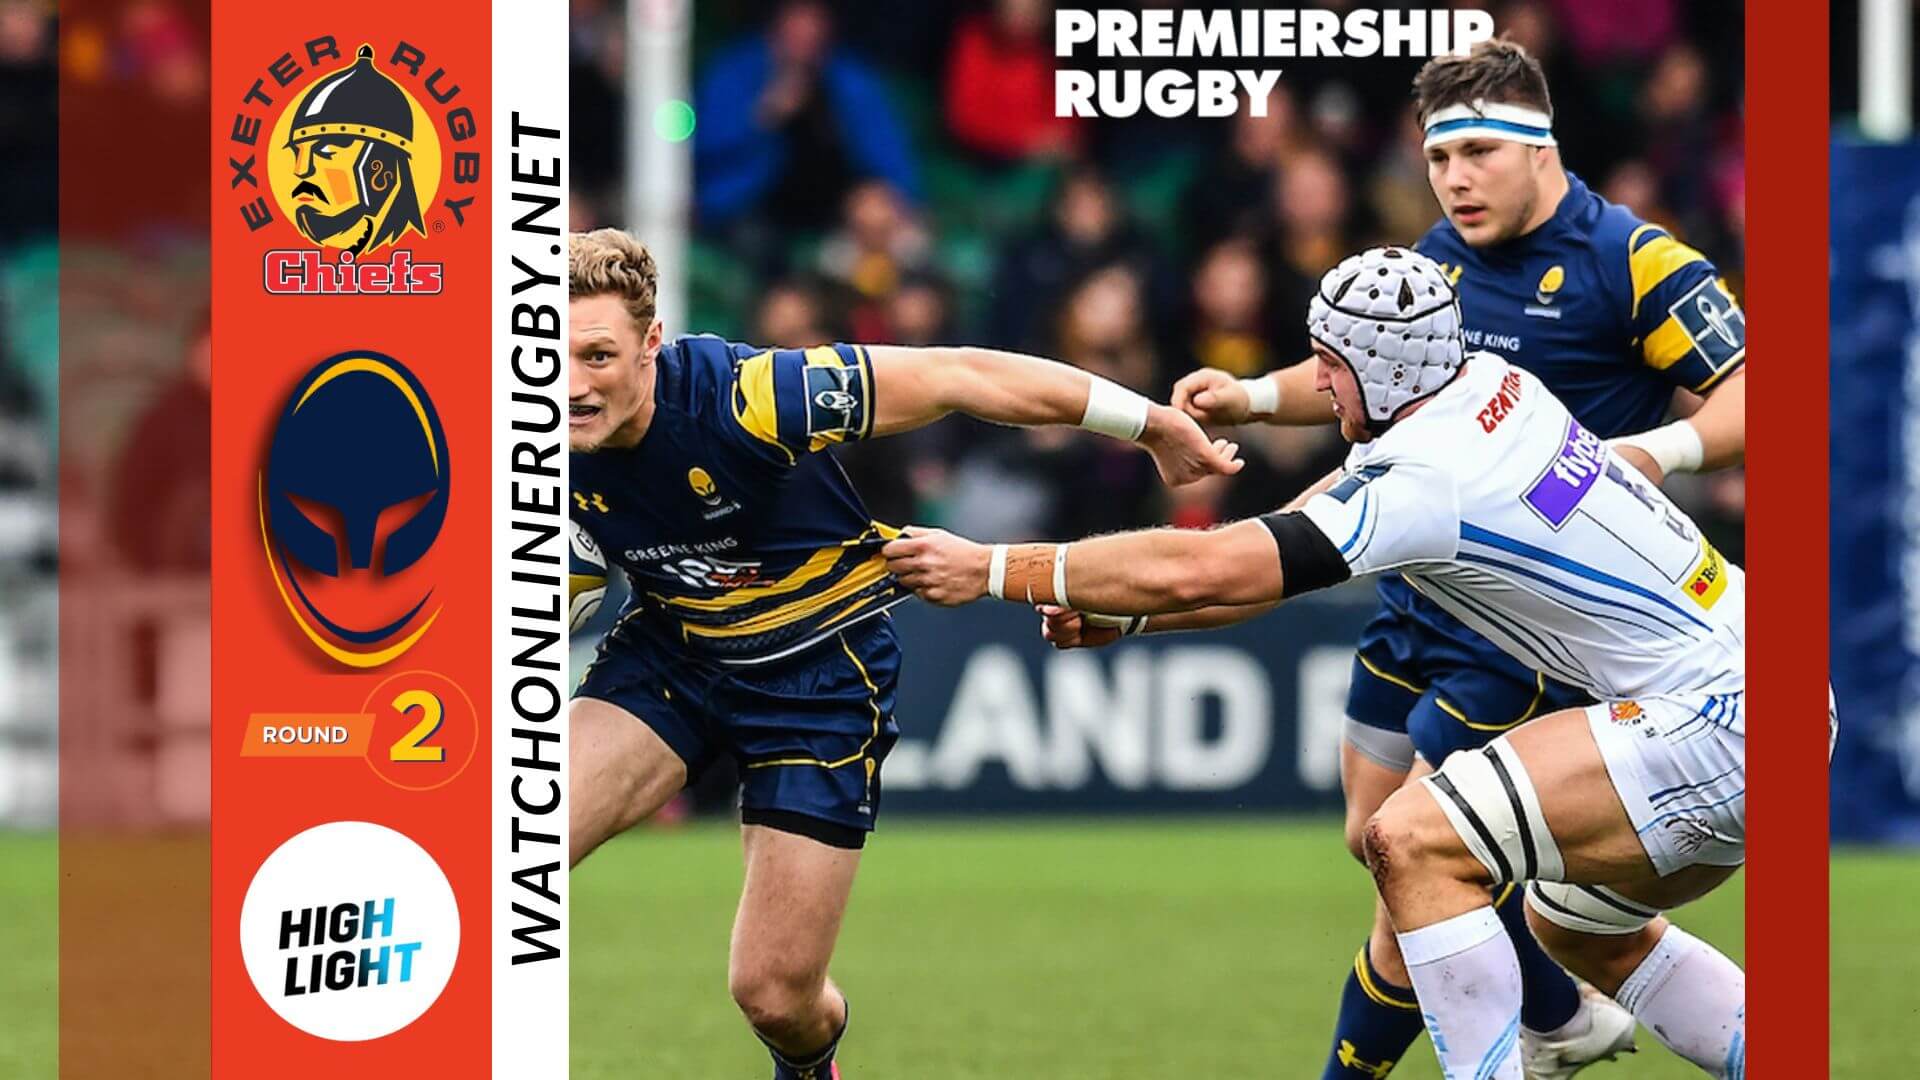 Worcester Warriors Vs Exeter Chiefs Premiership Rugby 2022 RD 2